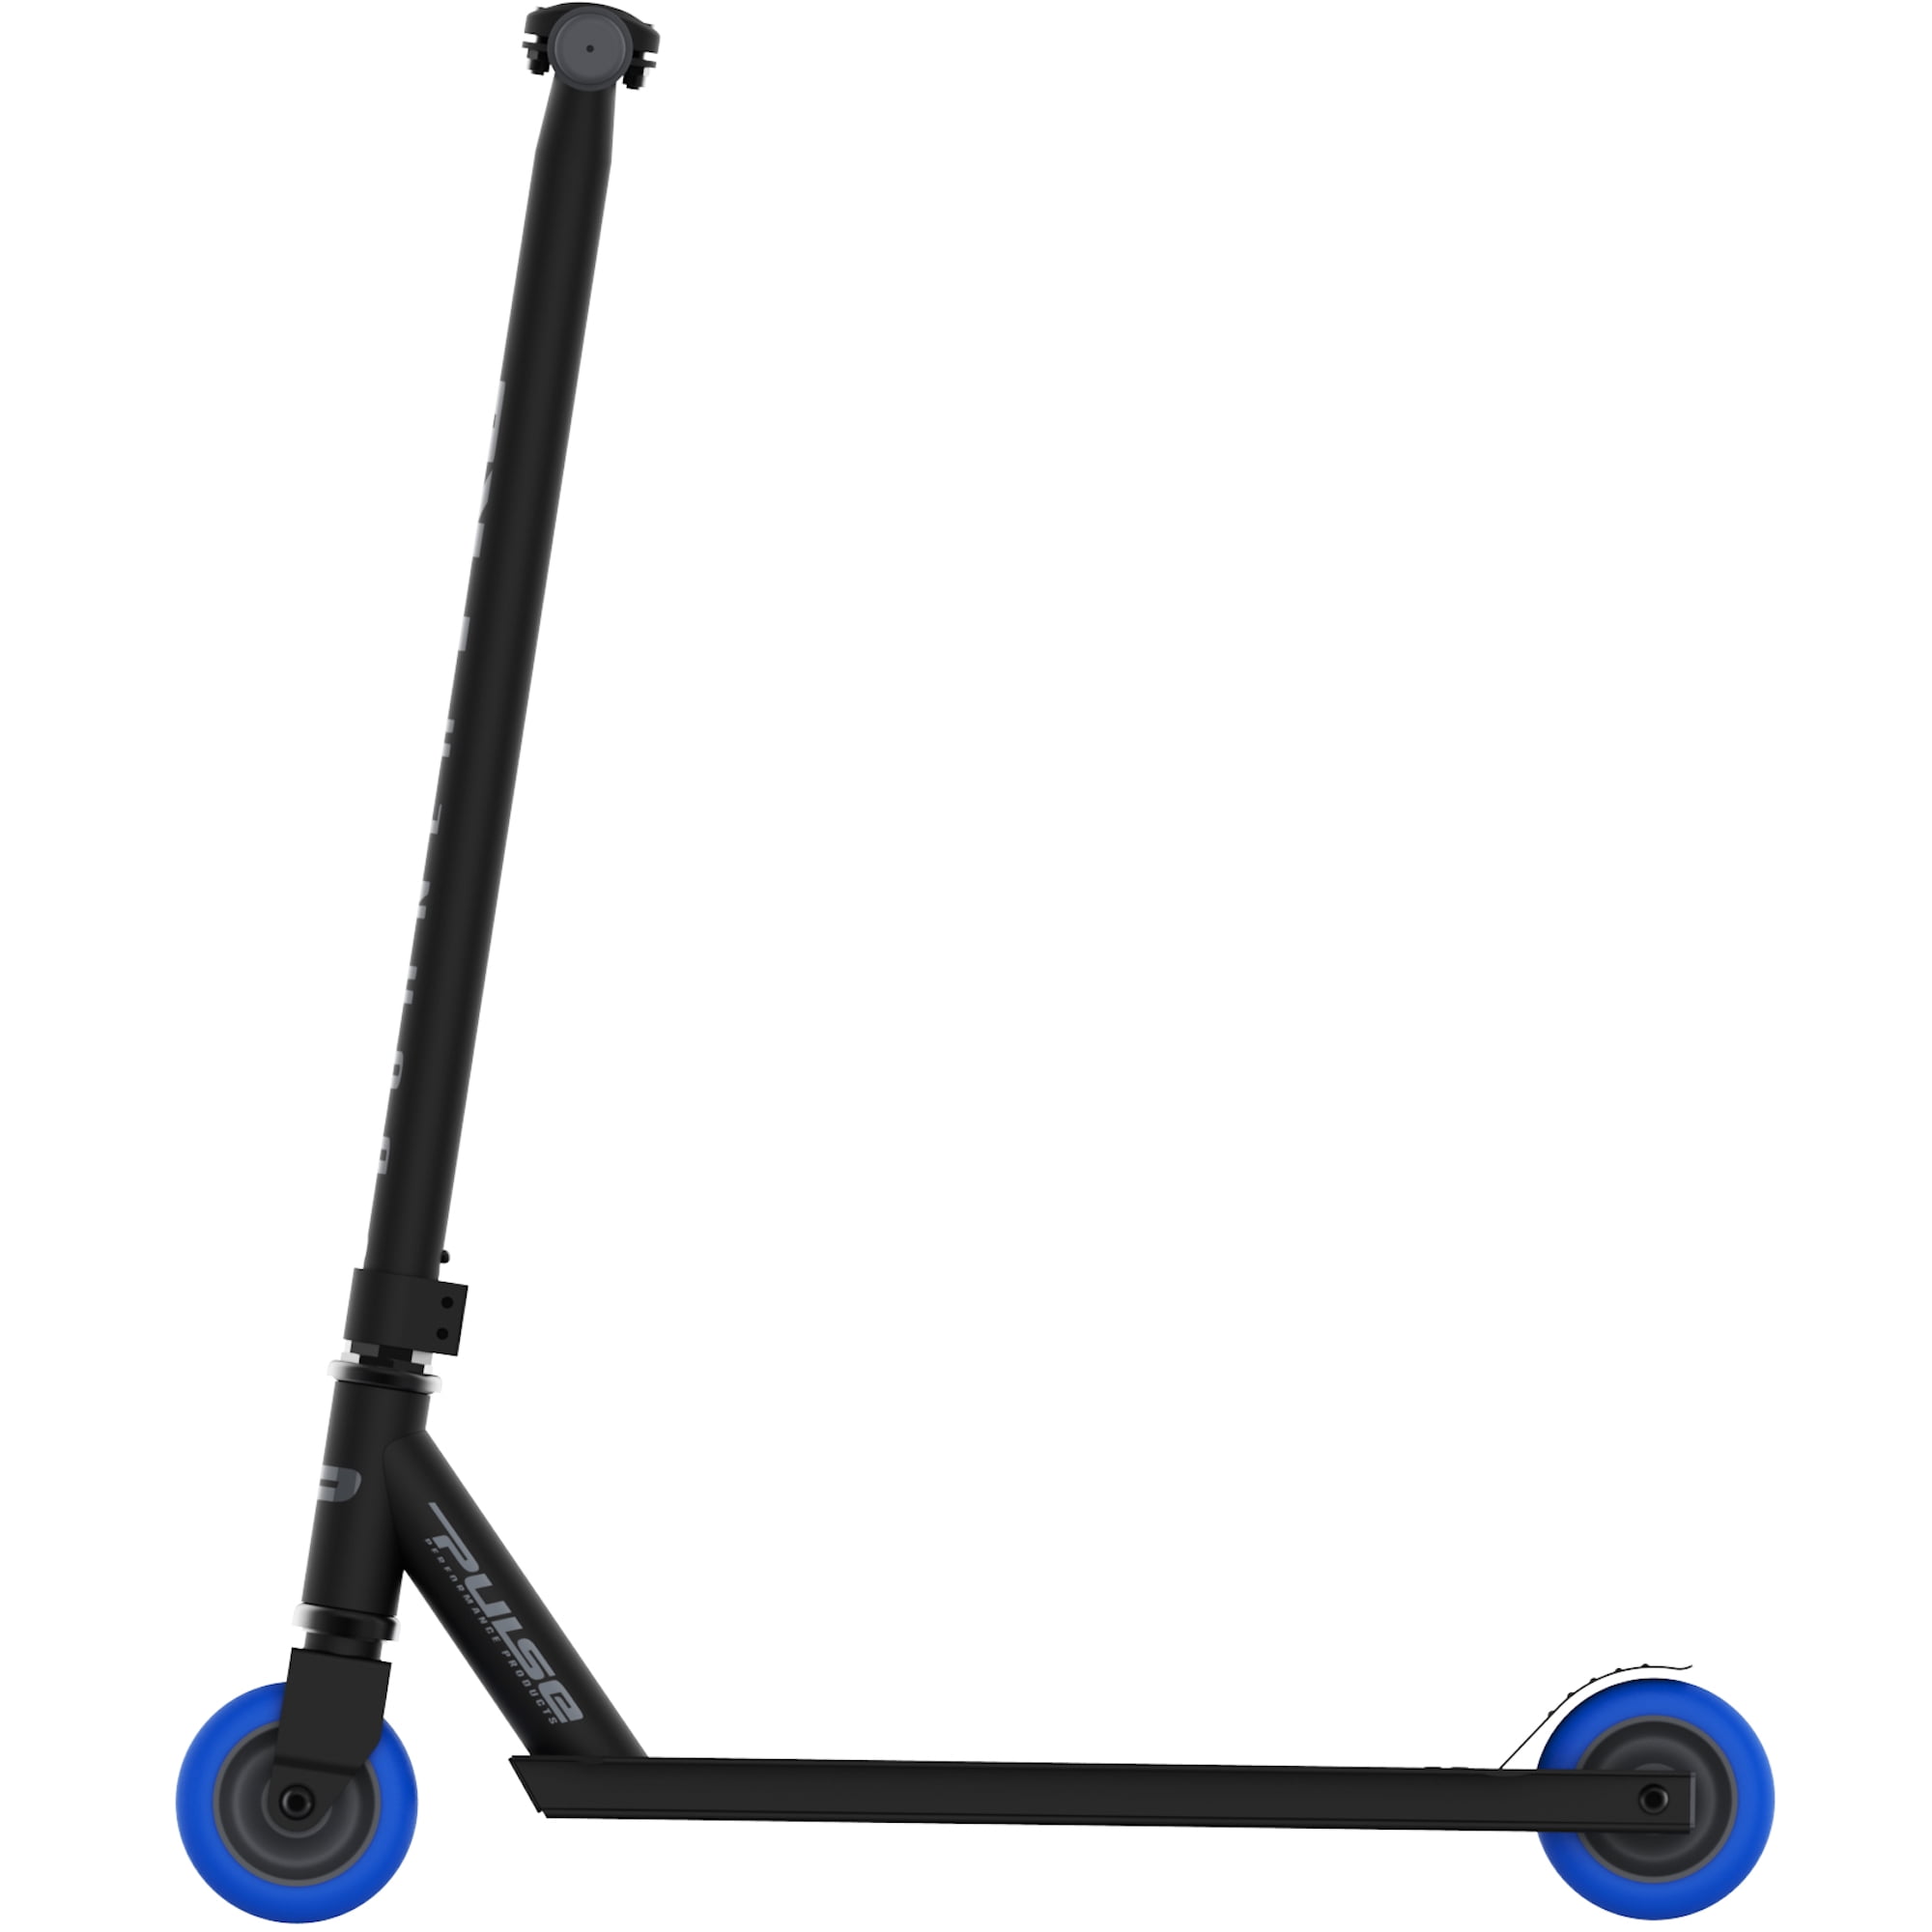  Pulse Performance Products KR2 Freestyle Scooter - Beginner  Kick Pro Scooter for Kids - Blue : Sports & Outdoors